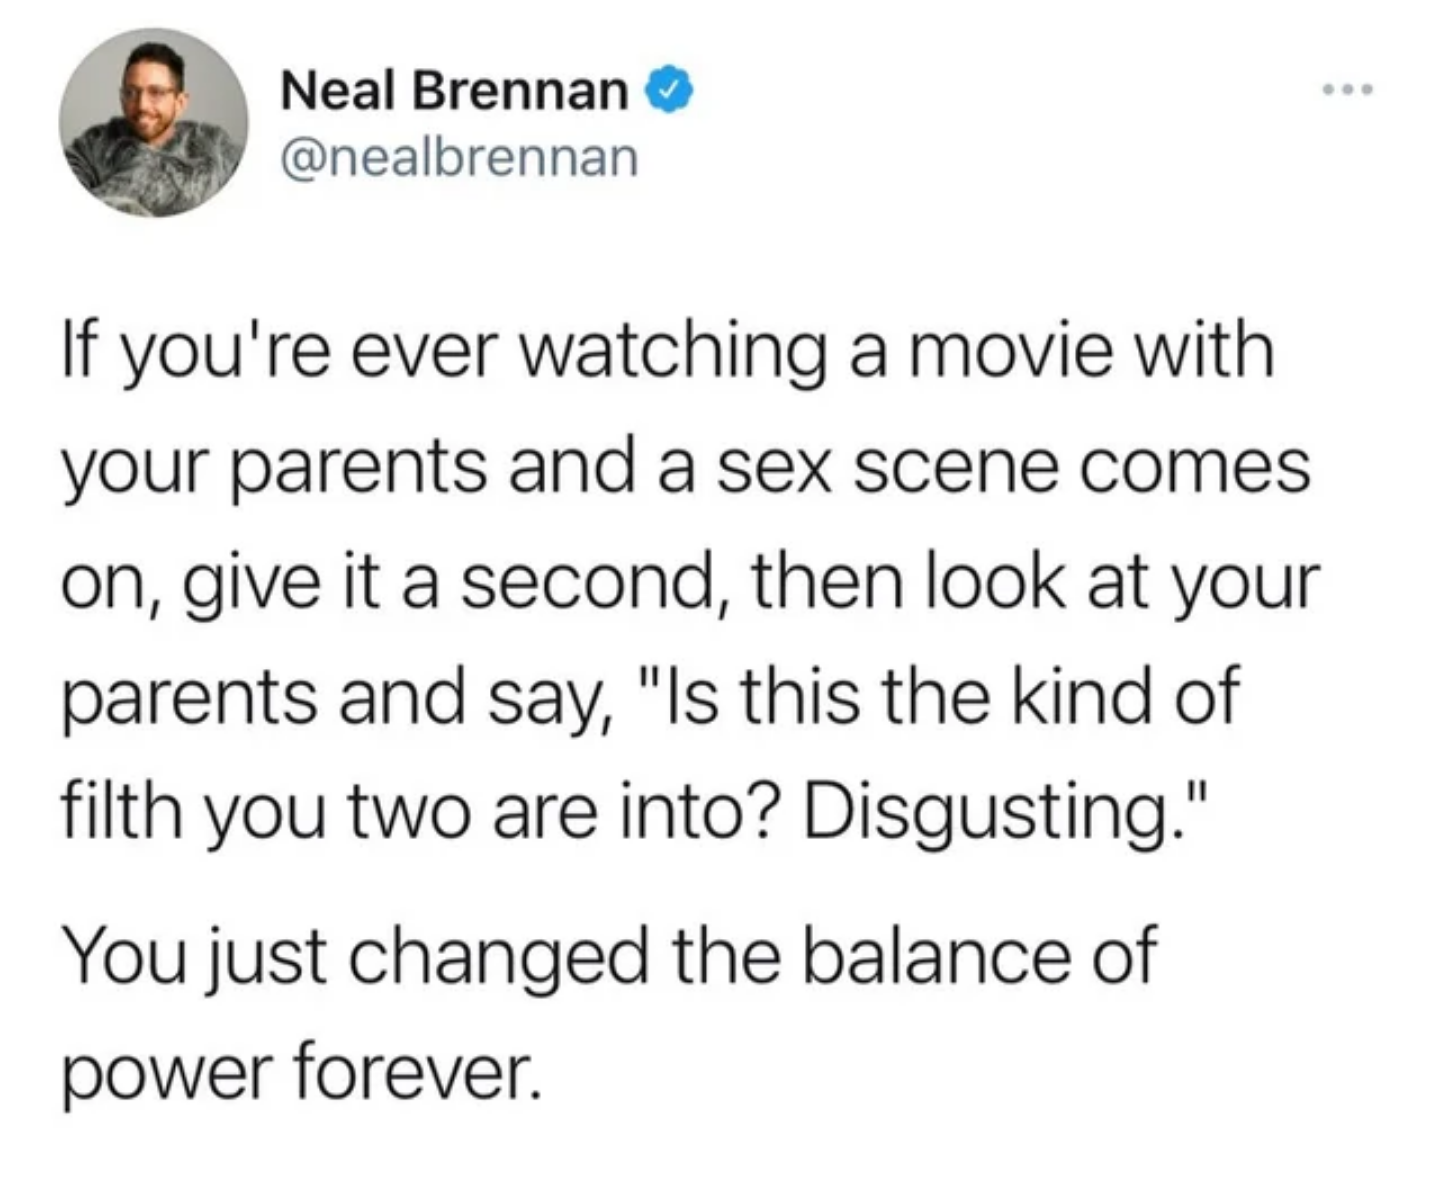 reddit student loans - Neal Brennan If you're ever watching a movie with your parents and a sex scene comes on, give it a second, then look at your parents and say, "Is this the kind of filth you two are into? Disgusting." You just changed the balance of 